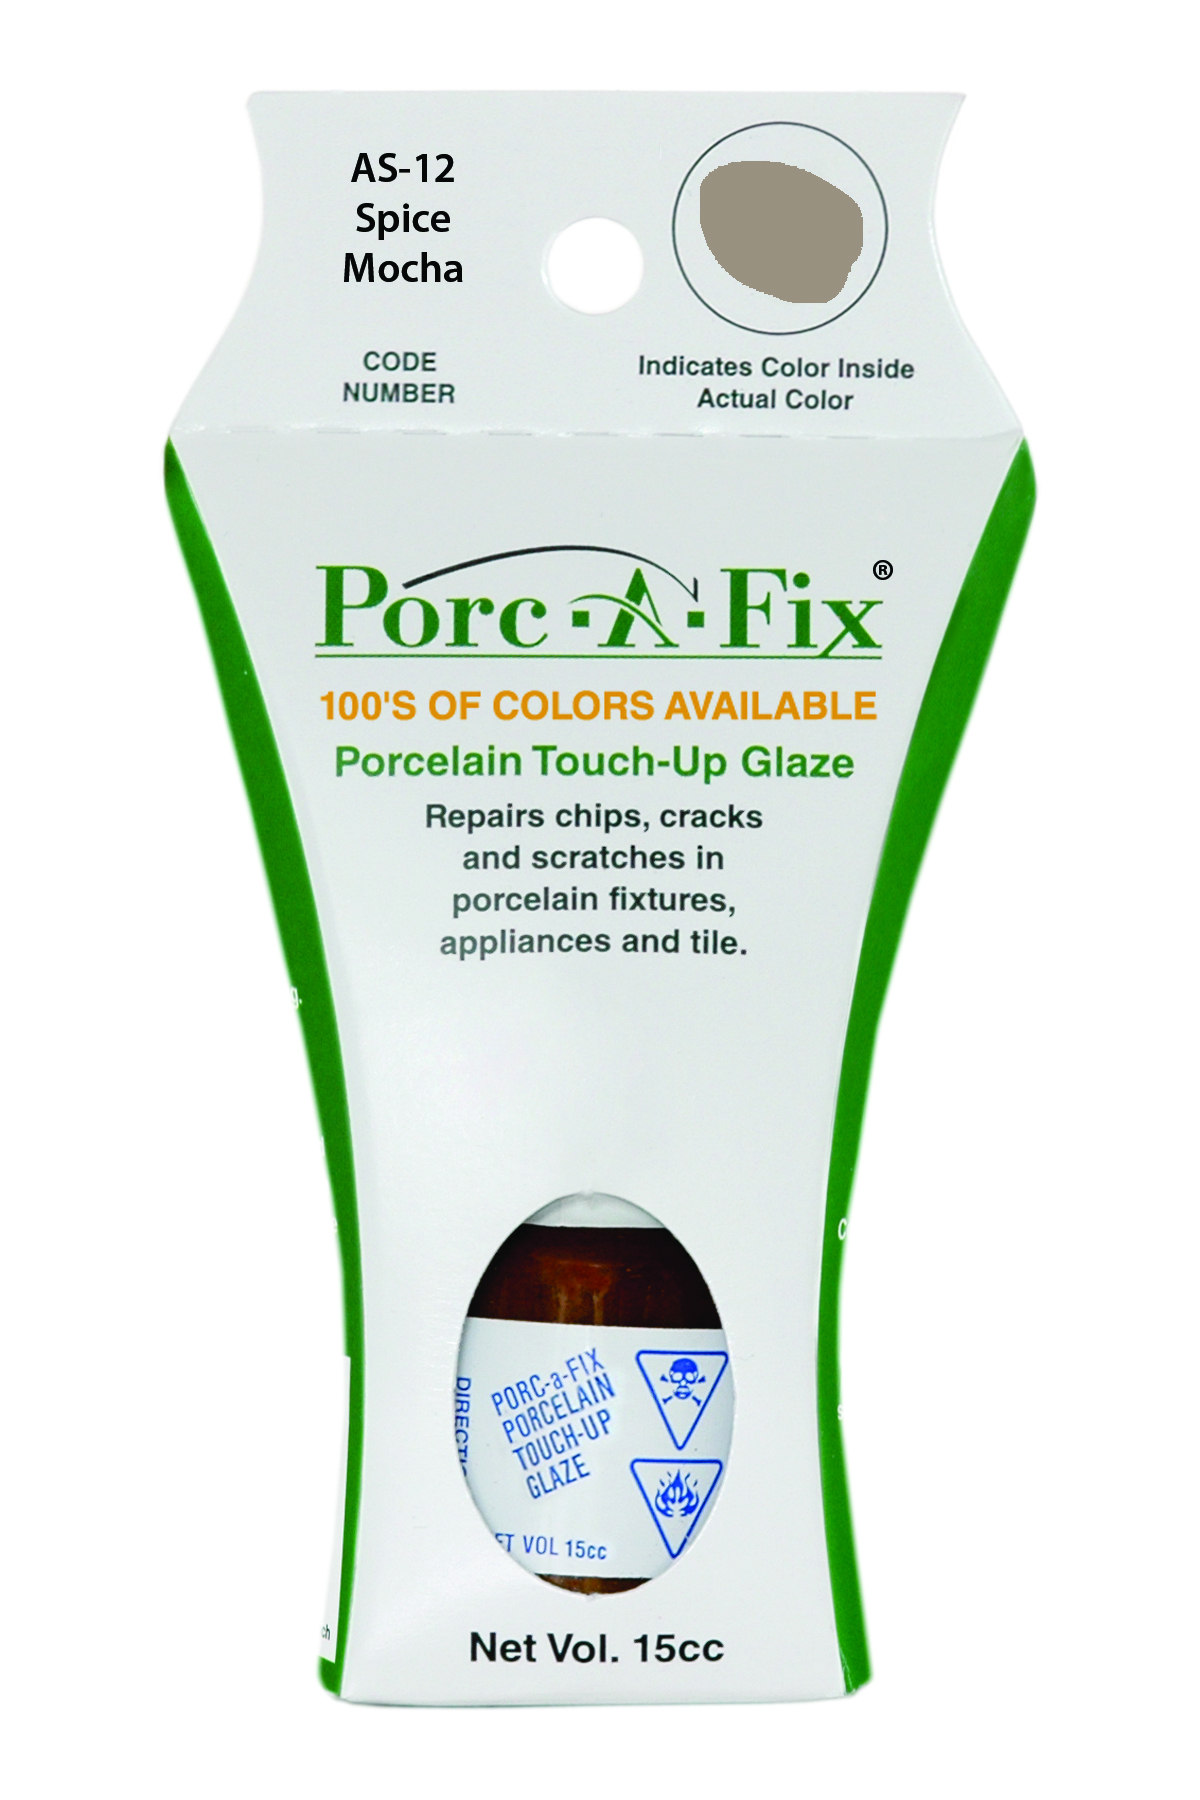 Fixture-Fix | AS-12 | Porc-A-Fix Touch-Up Glaze American Standard Spice Mocha - Compatible with American Standard 070900-0490A Touch Up Paint Kit - SPICE MOCHA